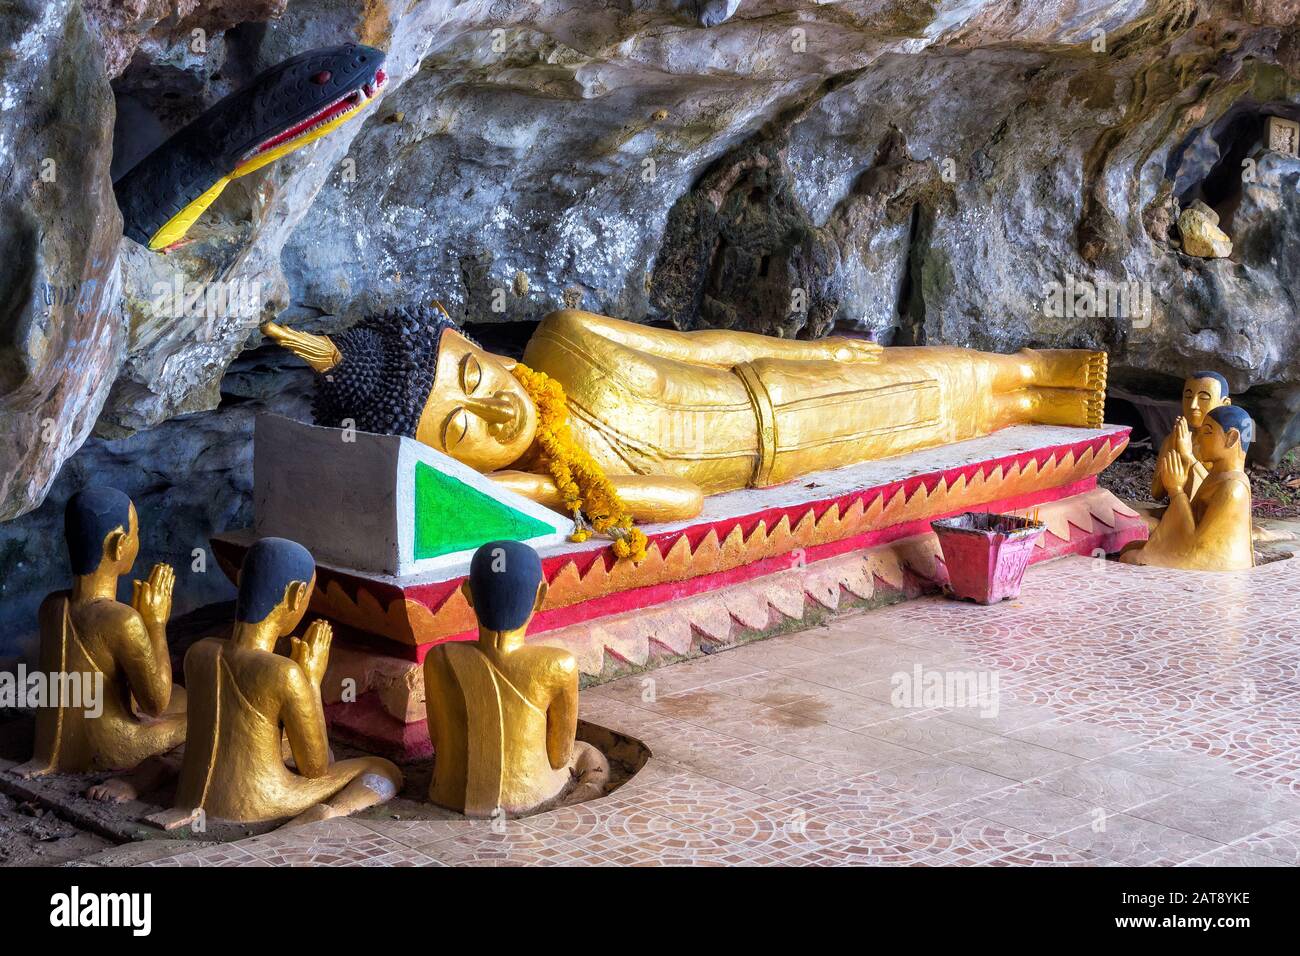 Reclining Buddha at the Elephant Cave in Vang Vieng, Laos. Stock Photo